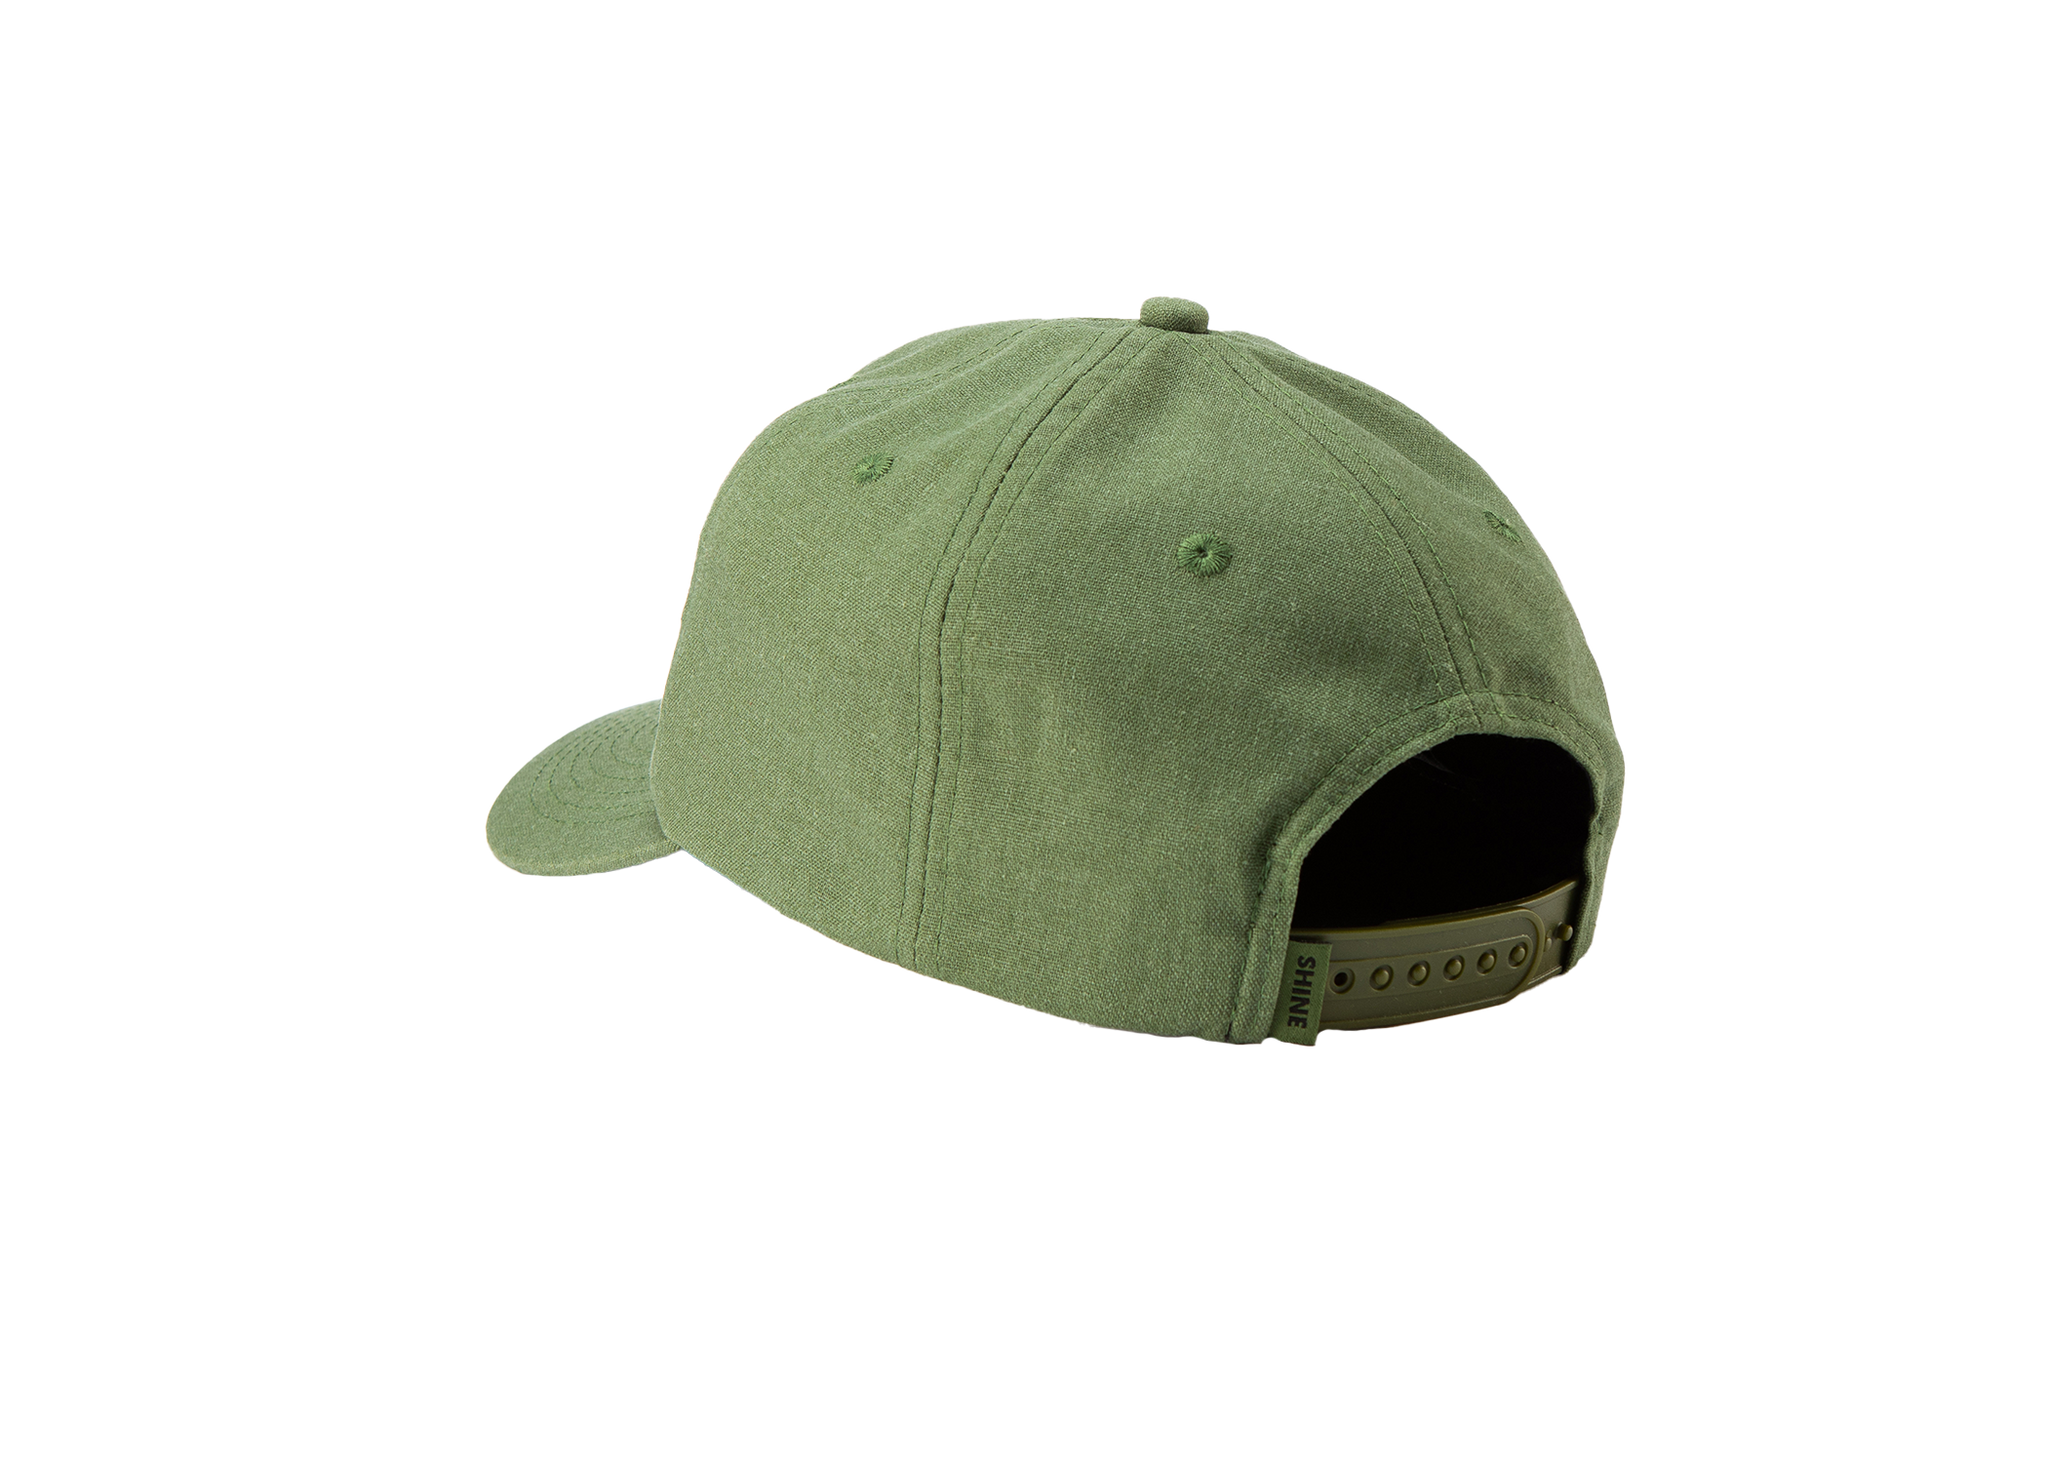 Back view of green hat with adjustable strap and tag that reads: "Shine"